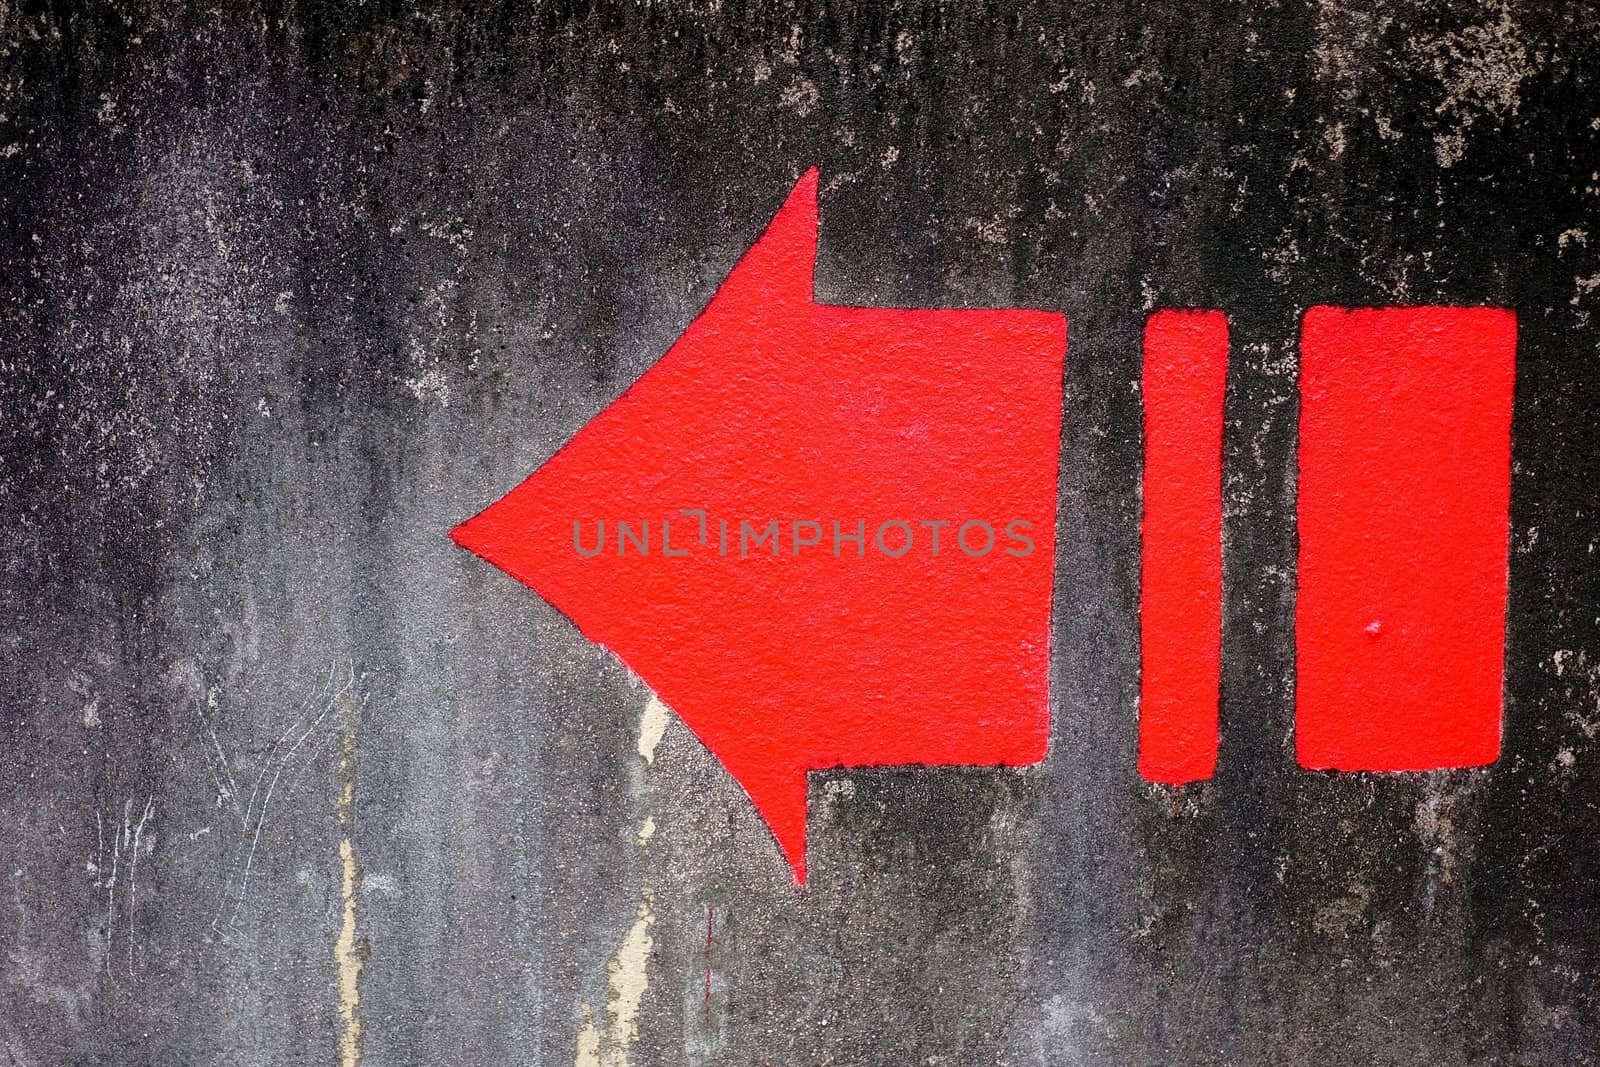 Red Arrow on Grunge Concrete Wall Background. by mesamong